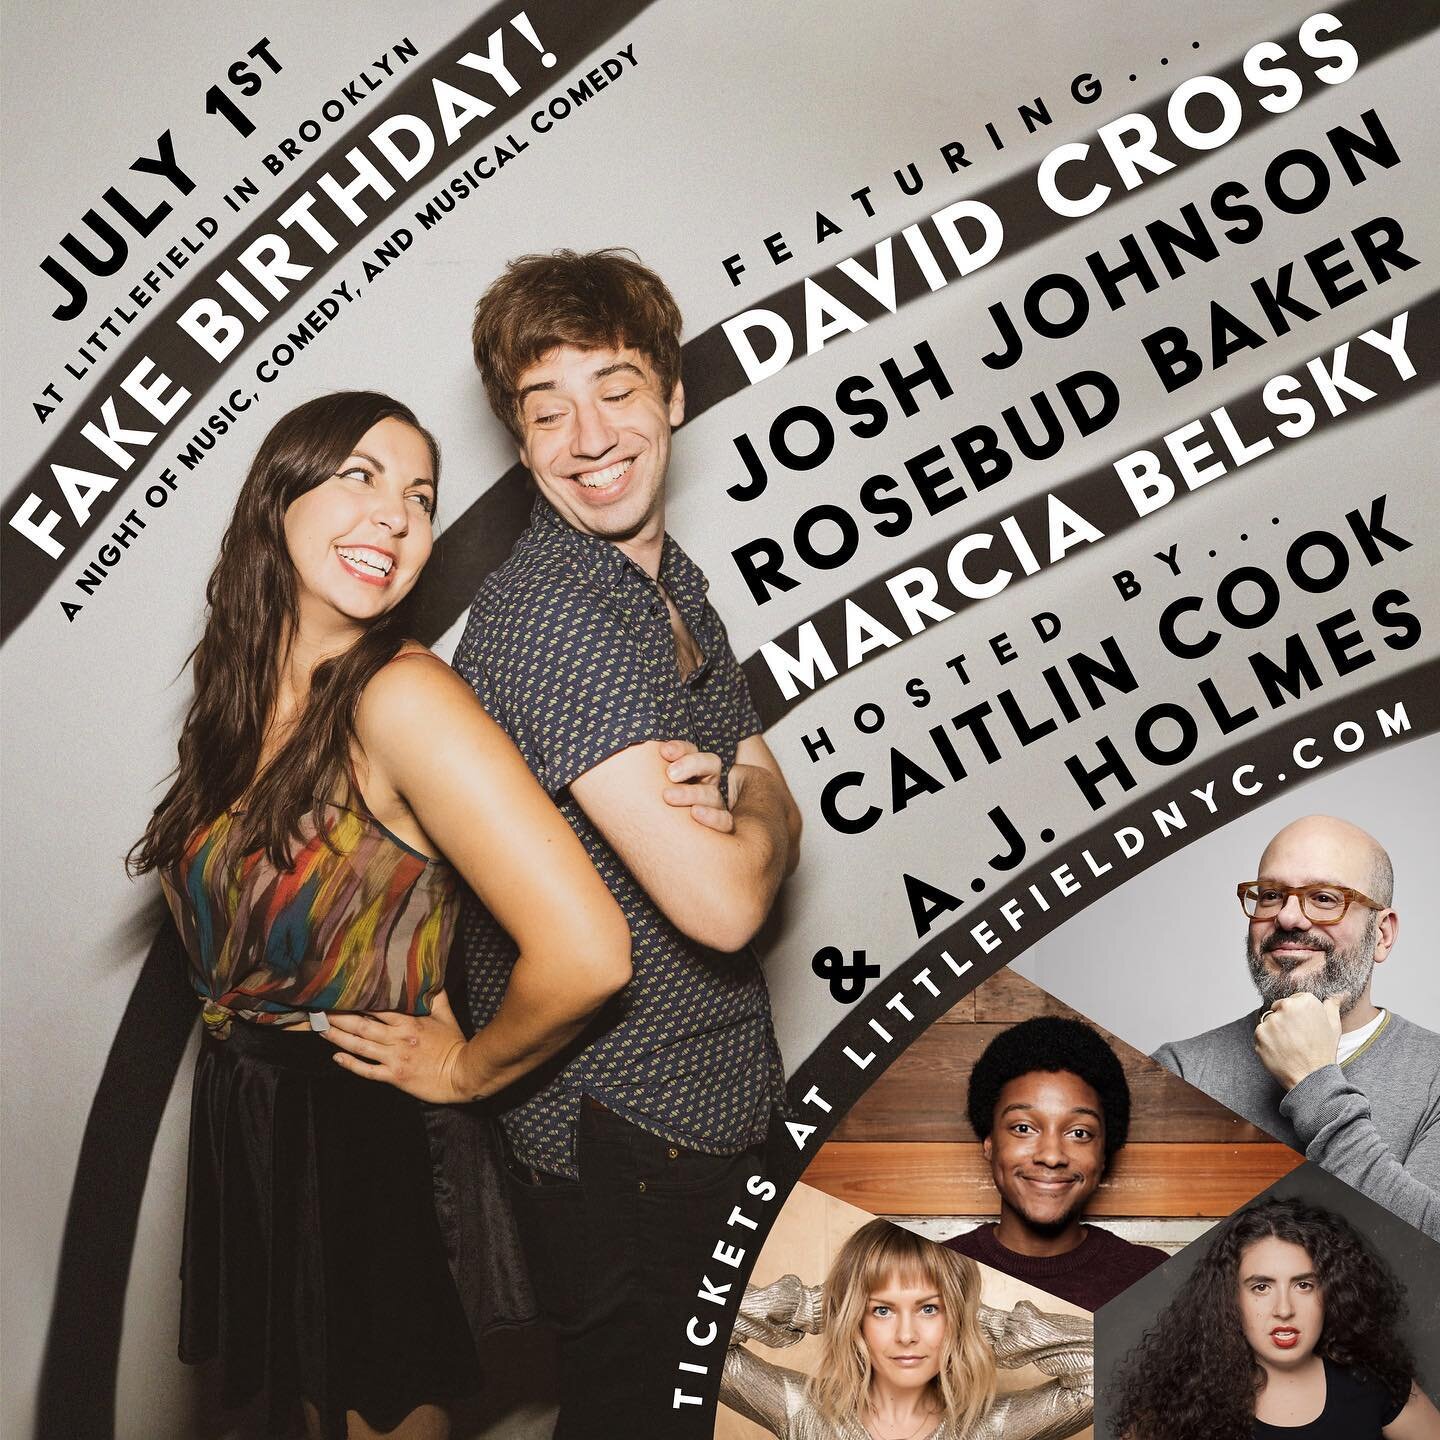 THIS WEEK! @davidcrossofficial, @joshjohnsoncomedy, @rosebudbaker, and @marciasky will be joining me and @thecaitlincook at @littlefieldnyc for Fake Birthday! Truly an insane line-up, plus Caitlin and I have a bunch of new songs to share. Get your ti